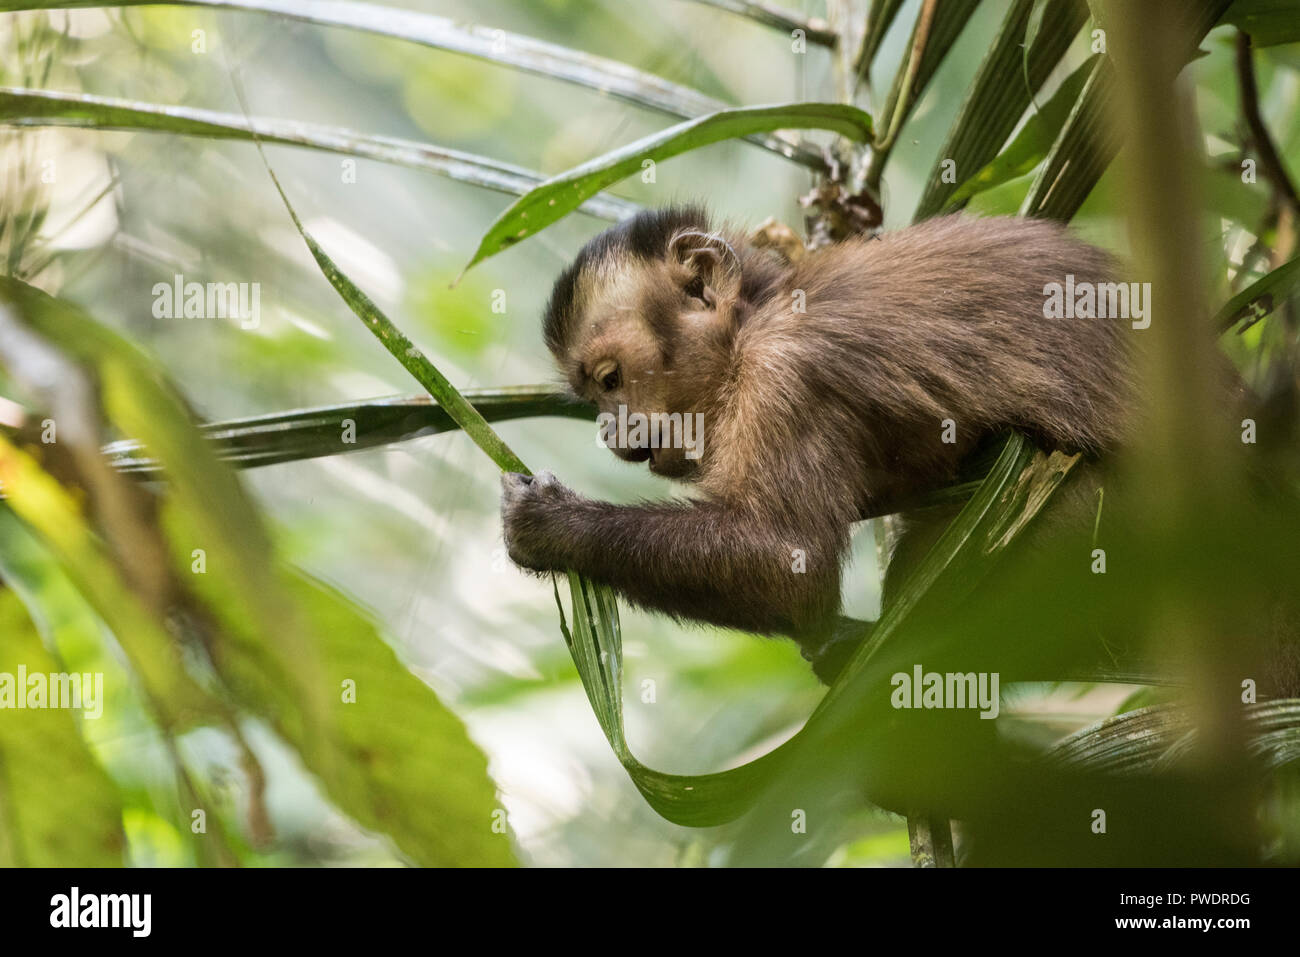 A young brown capuchin in the trees looking for food. Photographed in Madre de Dios Department, Peru. Stock Photo